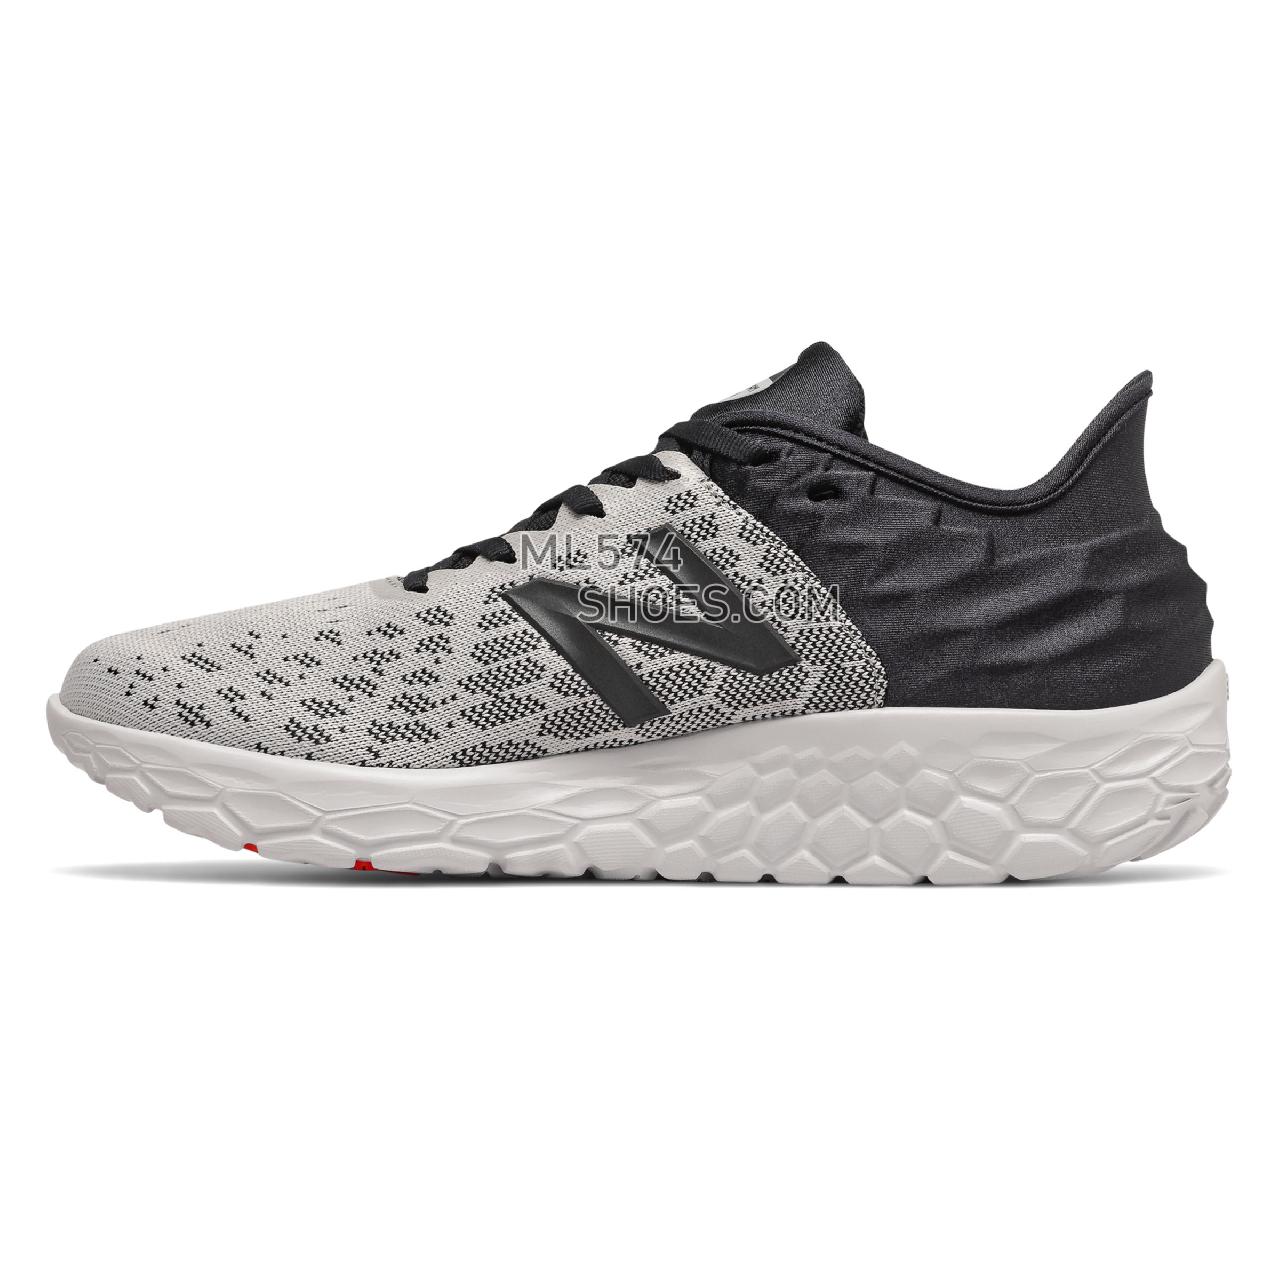 New Balance Fresh Foam Beacon v2 - Men's Neutral Running - Rain Cloud with Black and Neo Flame - MBECNGR2